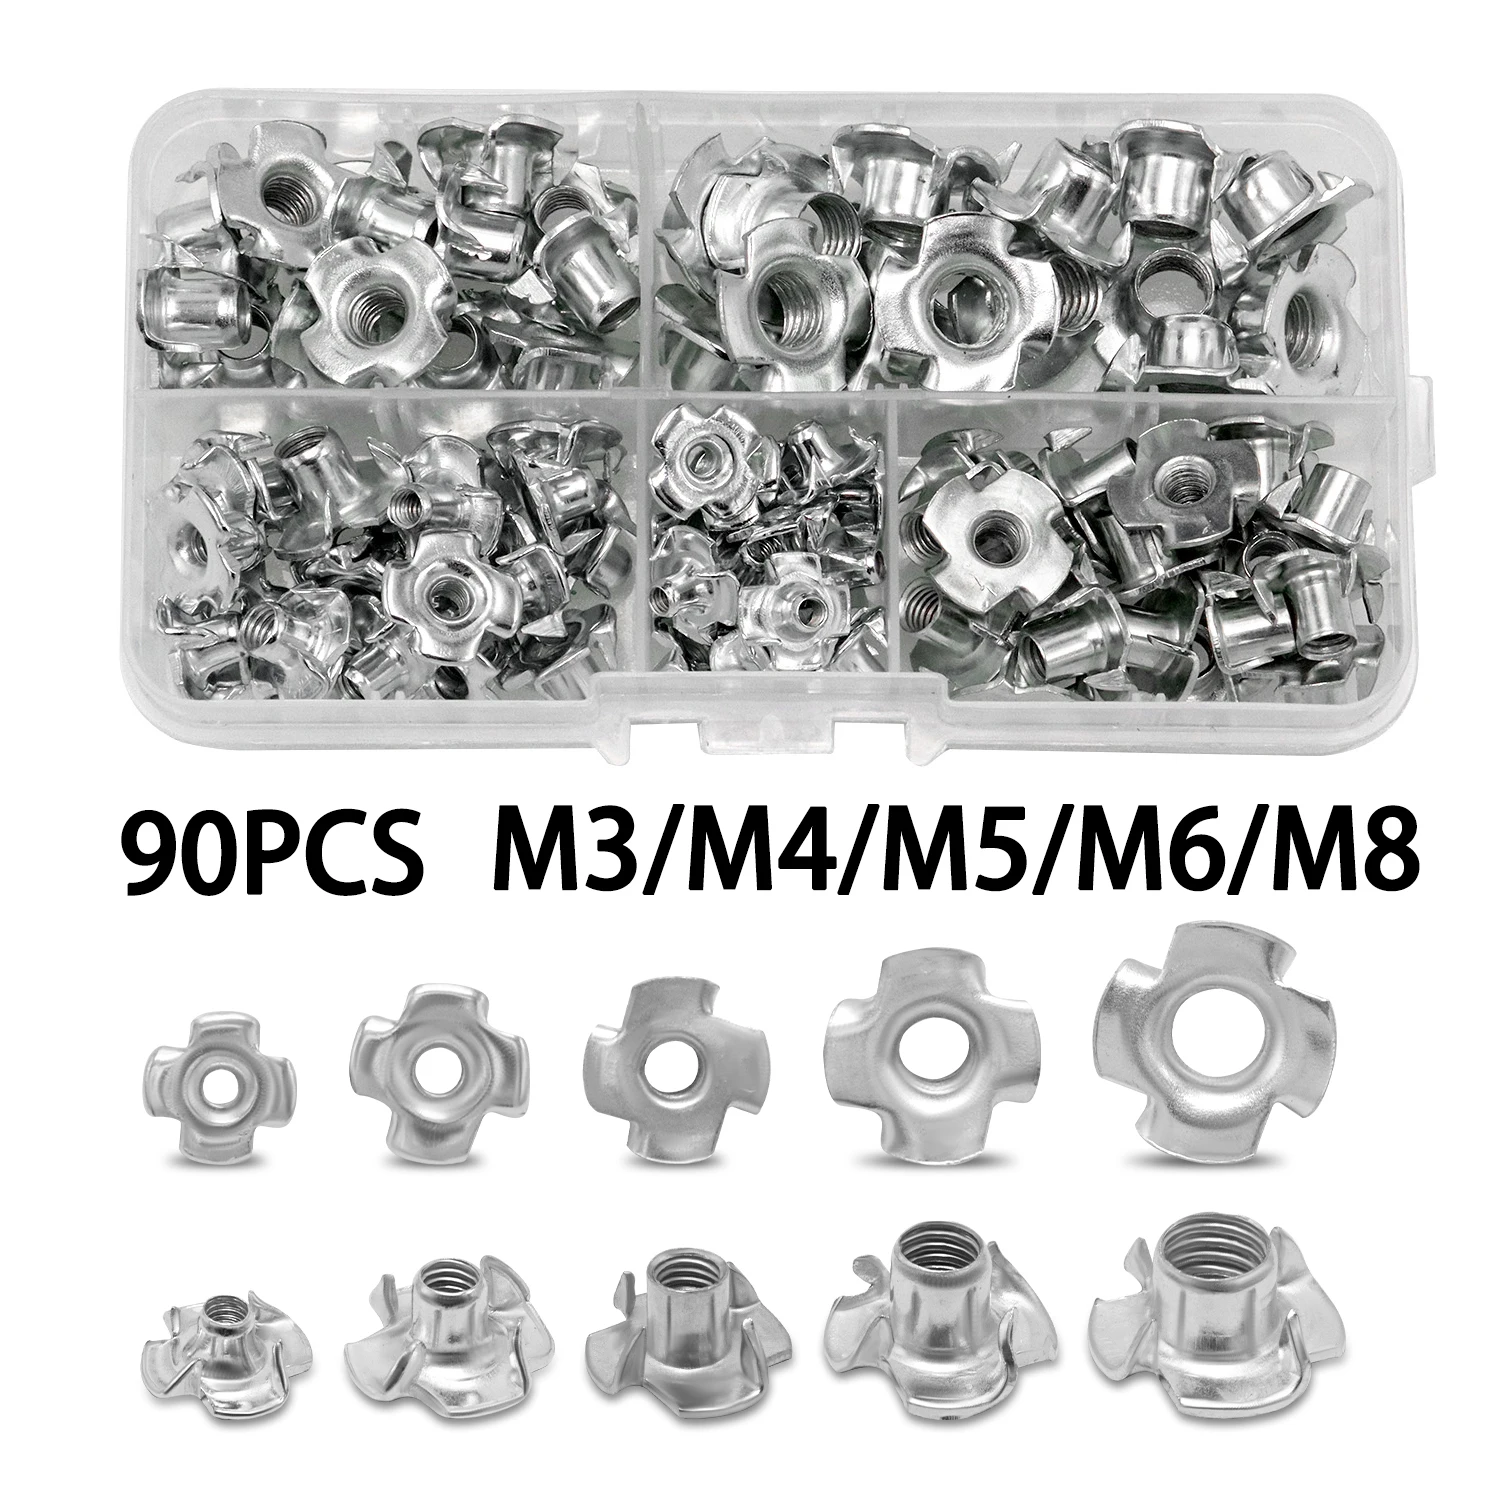 

90PCS M3 M4 M5 M6 M8 Four Pronged Claws Speaker Nut Blind Inserts Nut For Wood Furniture Rivet Nut Fasteners With Box